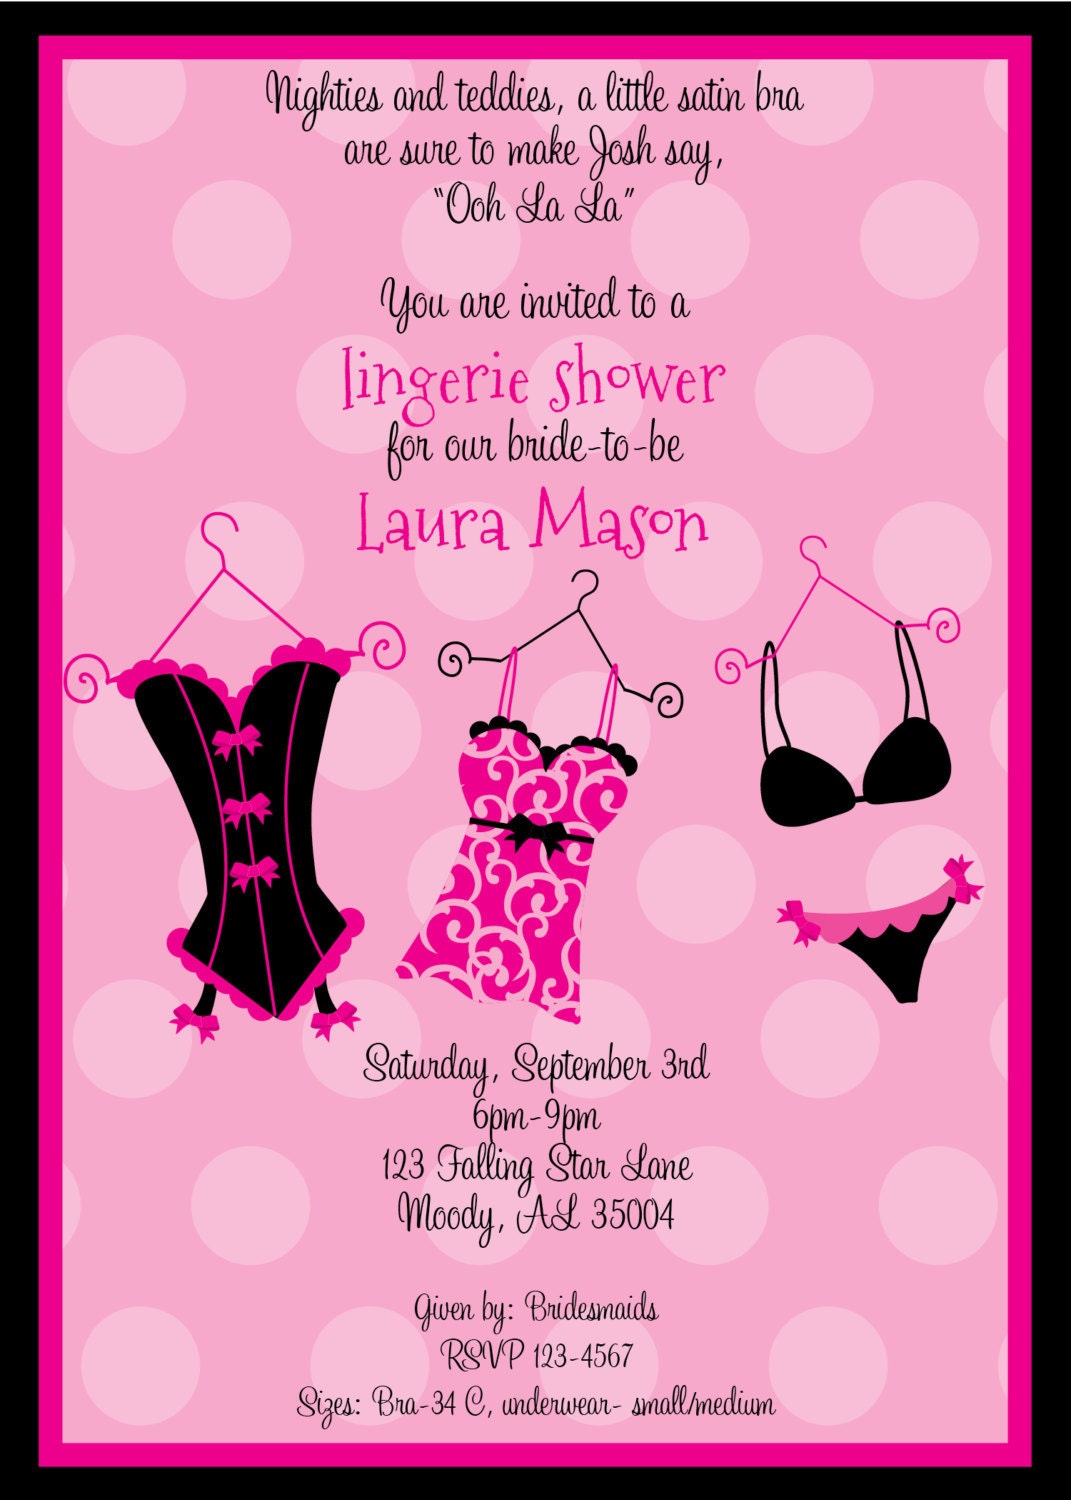 Funky Pink Lingerie shower invitation by lilypadboutiquestore